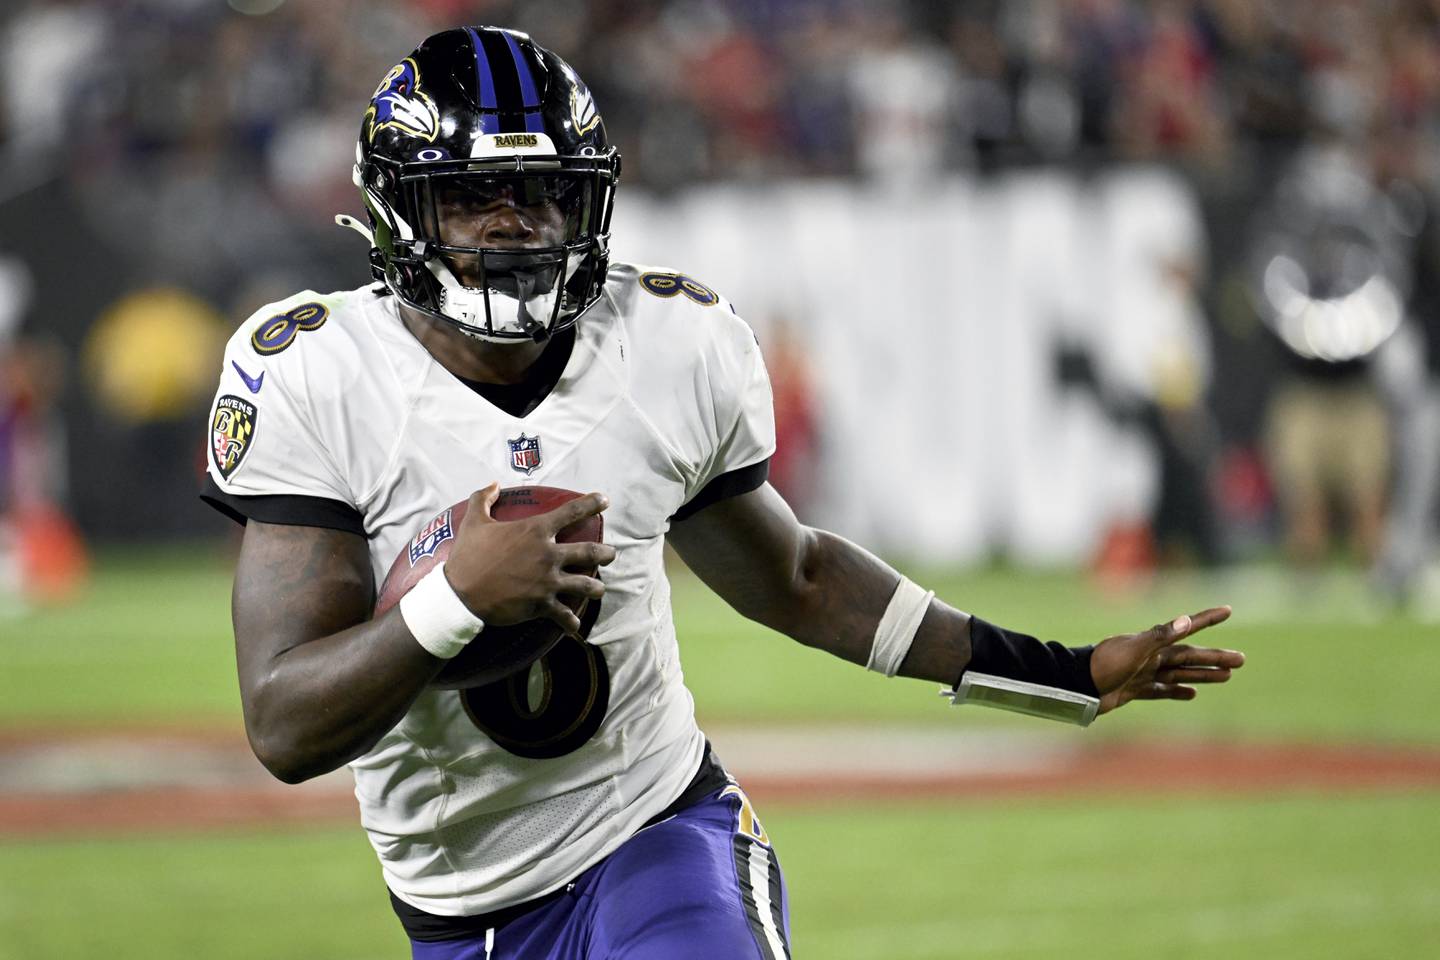 Baltimore Ravens quarterback Lamar Jackson scrambles during the second half of an NFL football game against the Tampa Bay Buccaneers Thursday, Oct. 27, 2022, in Tampa, Fla.